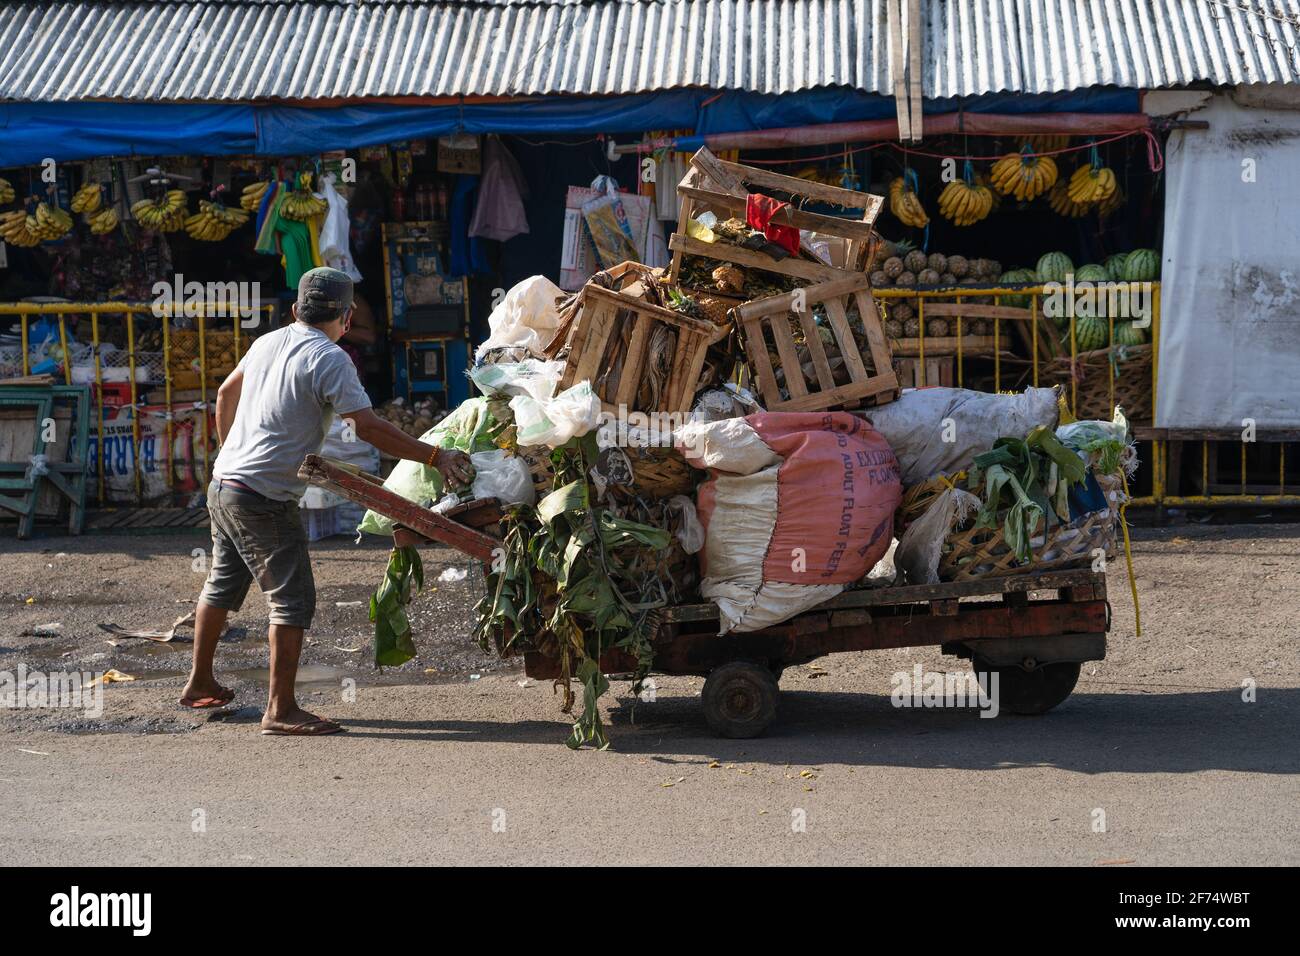 A man collecting market trash using a wooden cart, Cebu City, Philippines Stock Photo